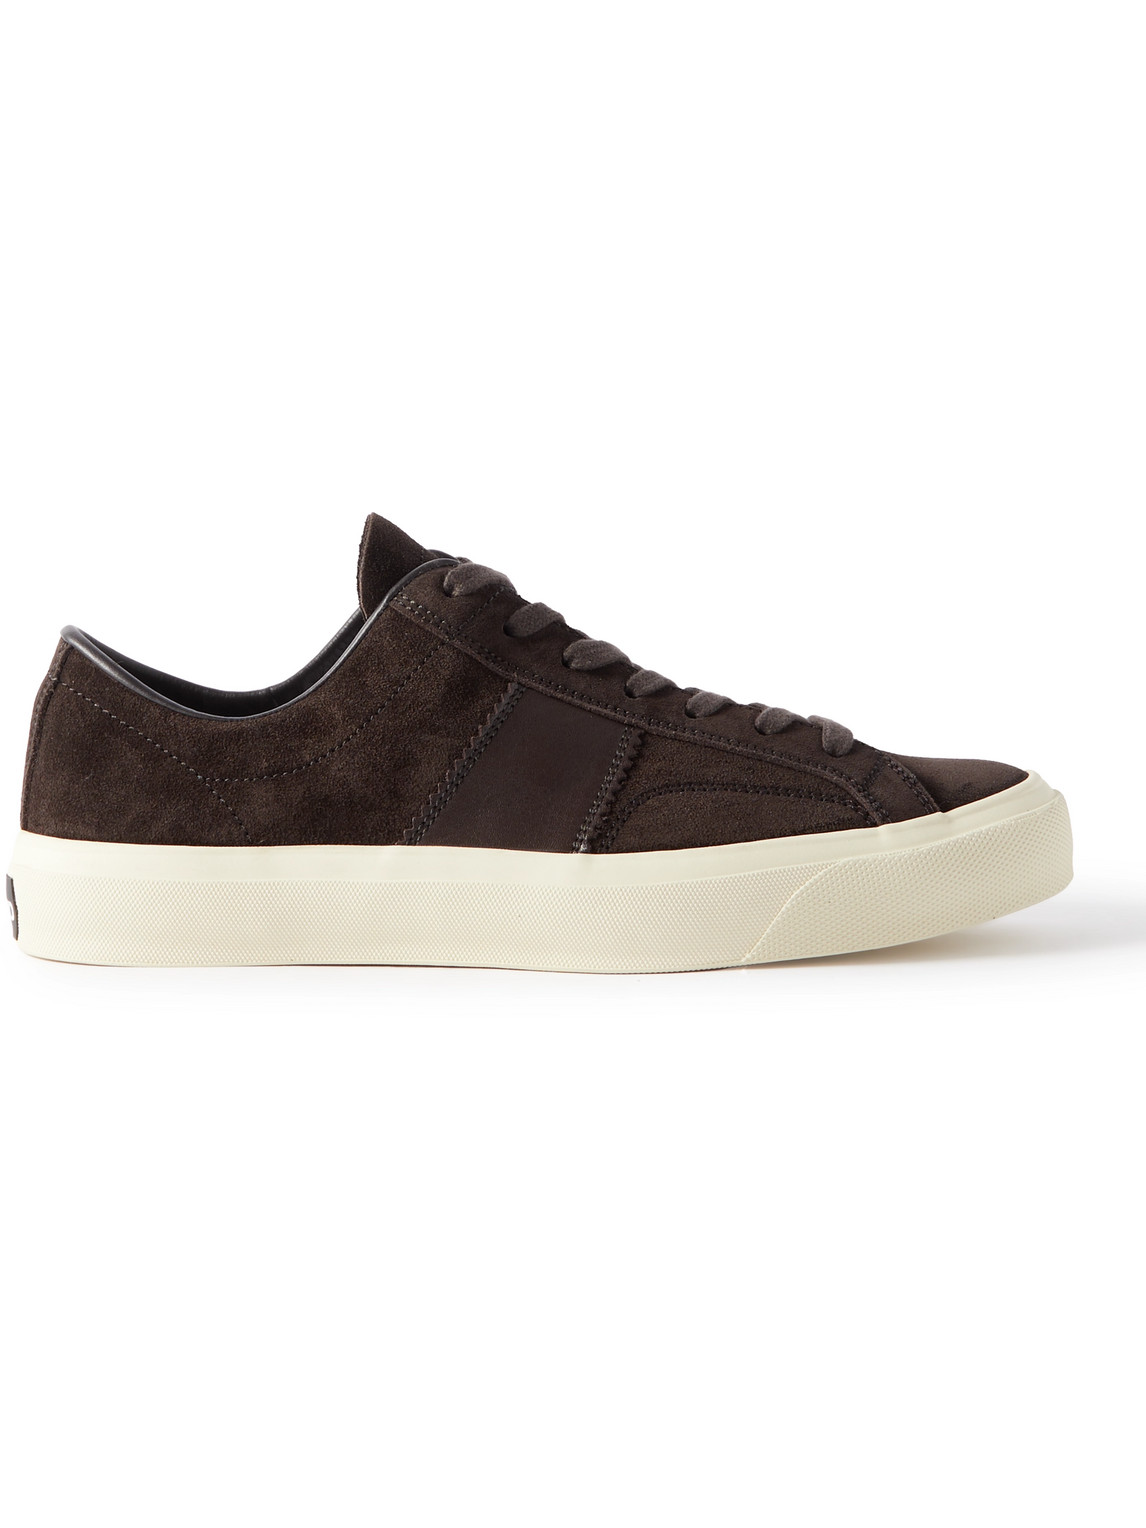 TOM FORD CAMBRIDGE LEATHER-TRIMMED SUEDE SNEAKERS